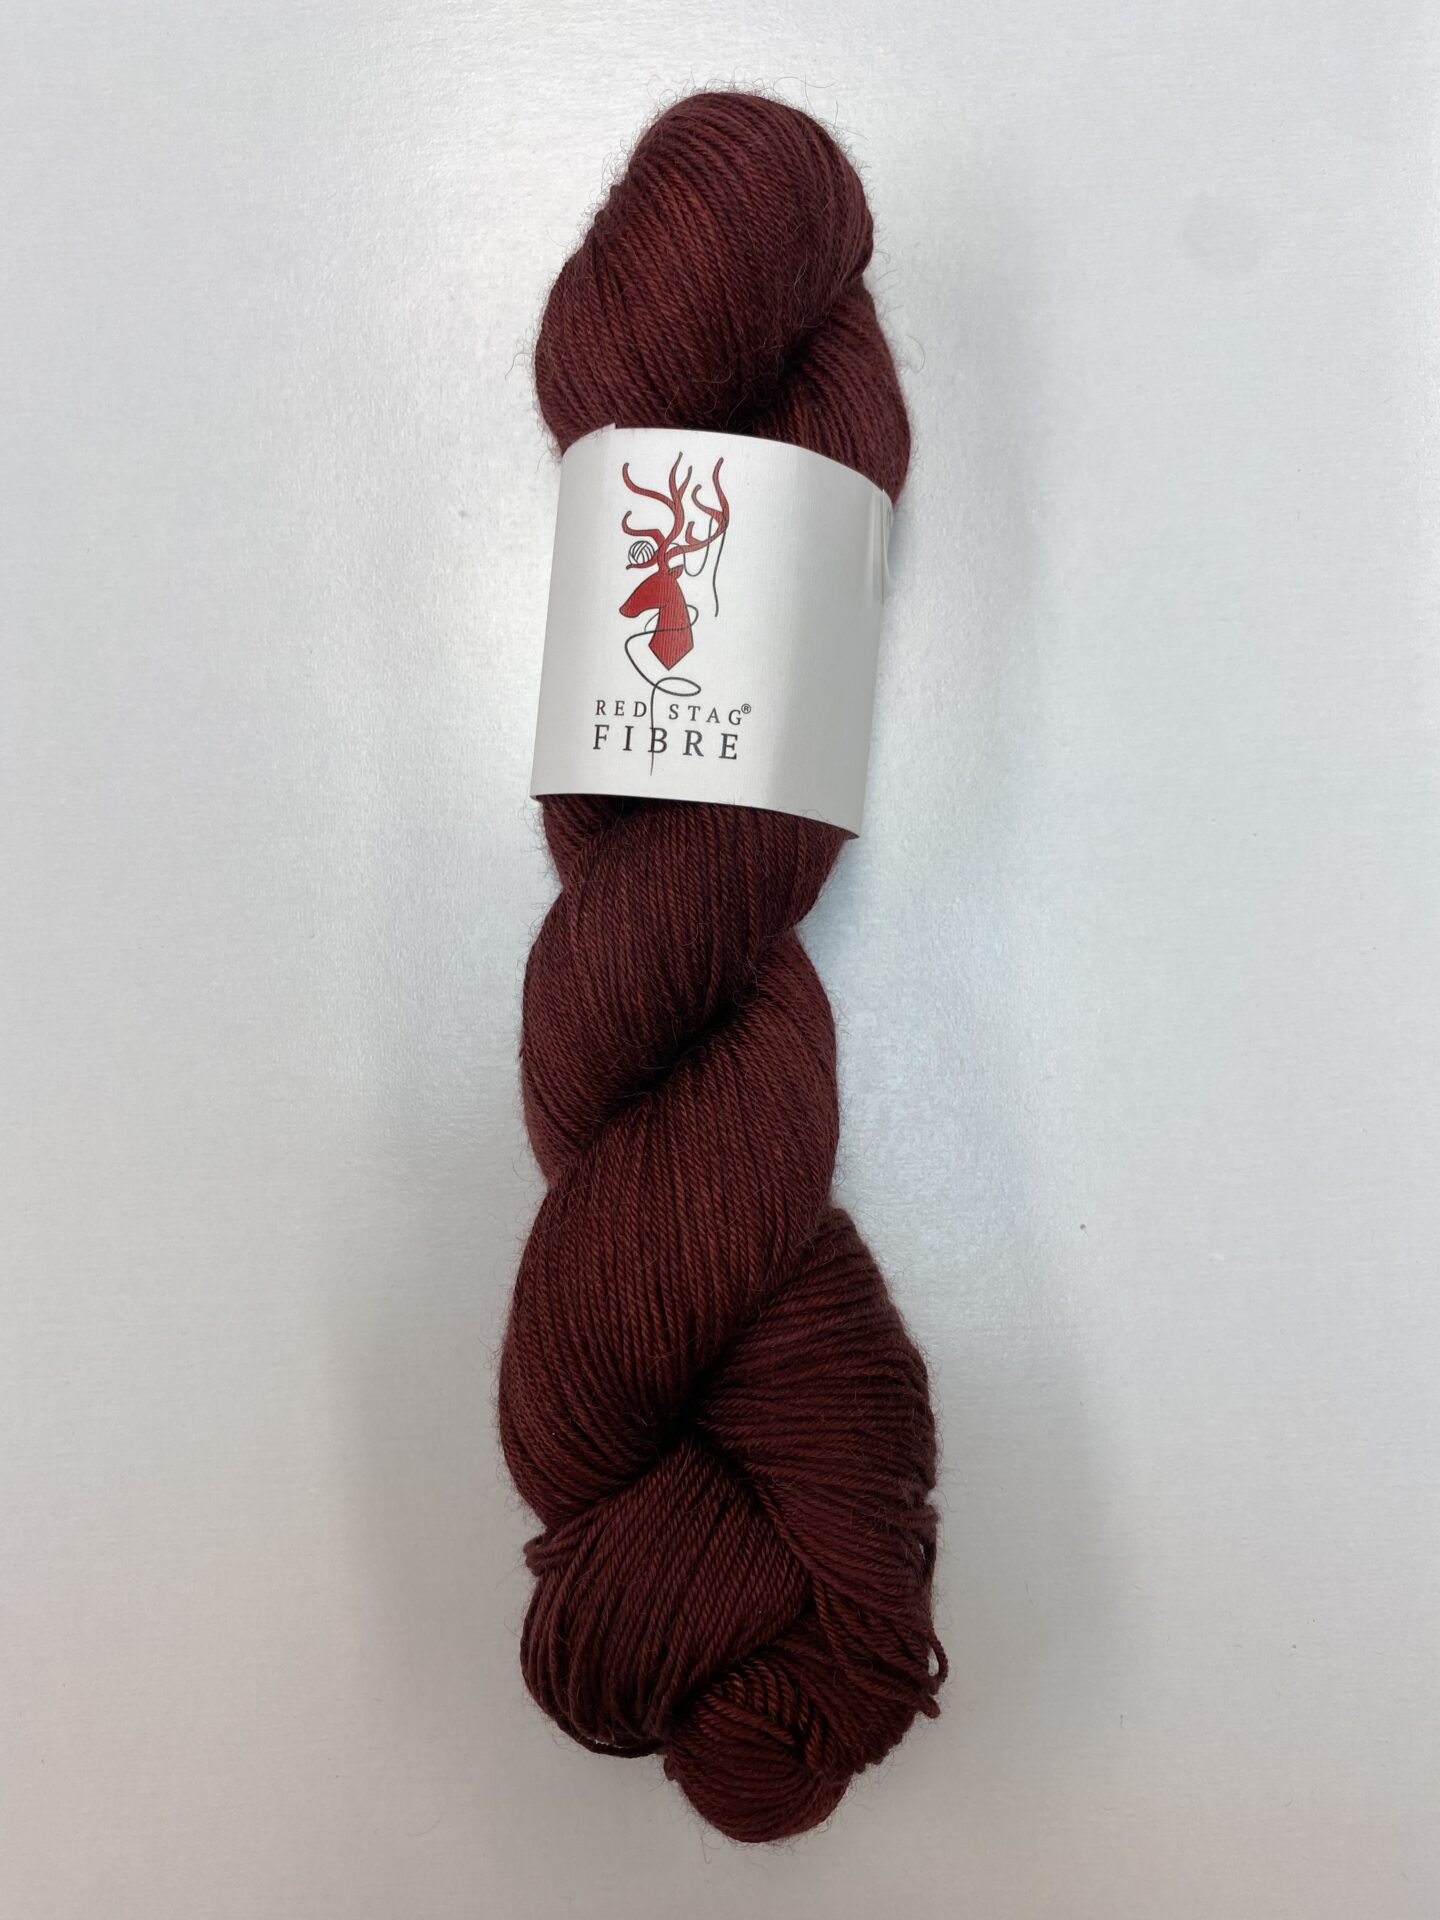 High Quality Red Stag Fibre Wool for Weaving